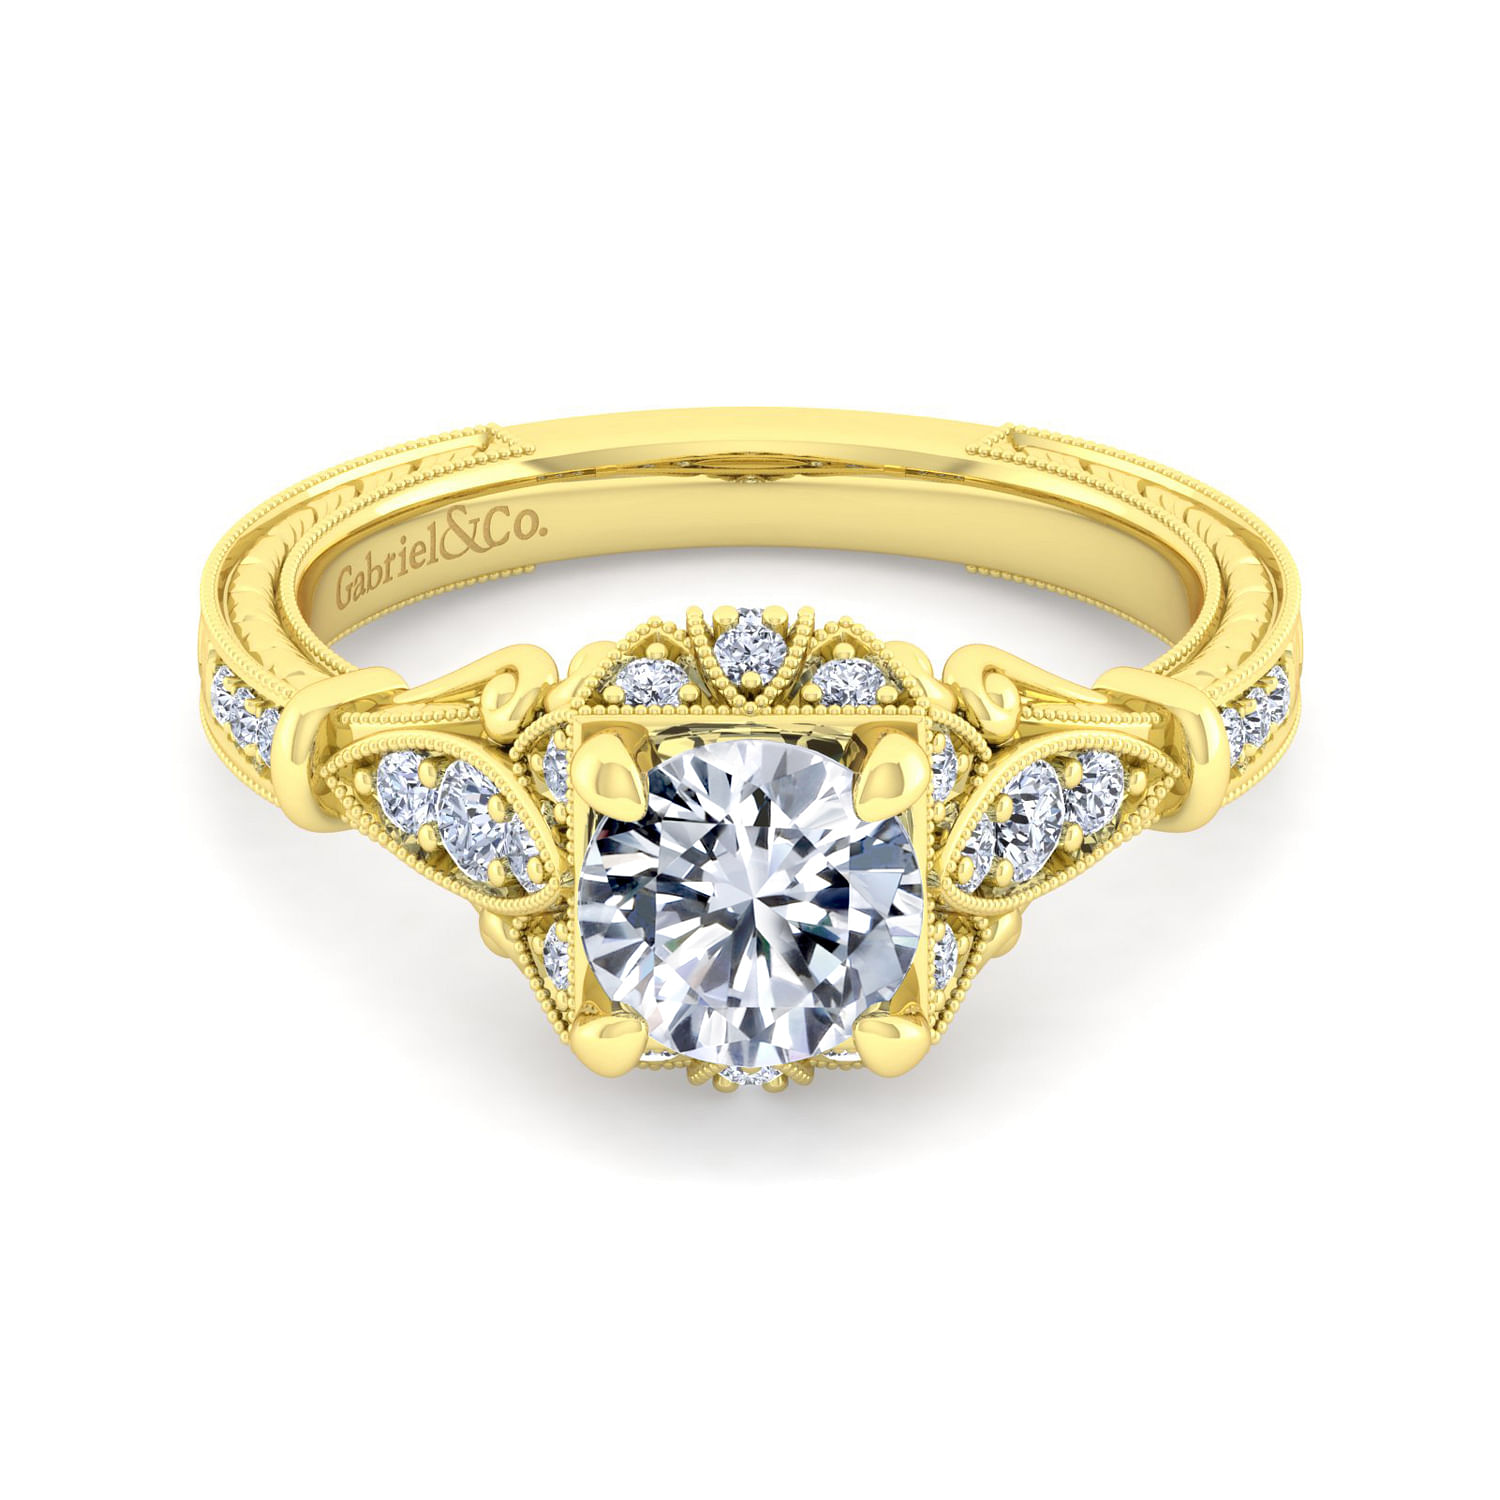 Montgomery - Unique 14K Yellow Gold Vintage Inspired Halo Diamond Engagement Ring